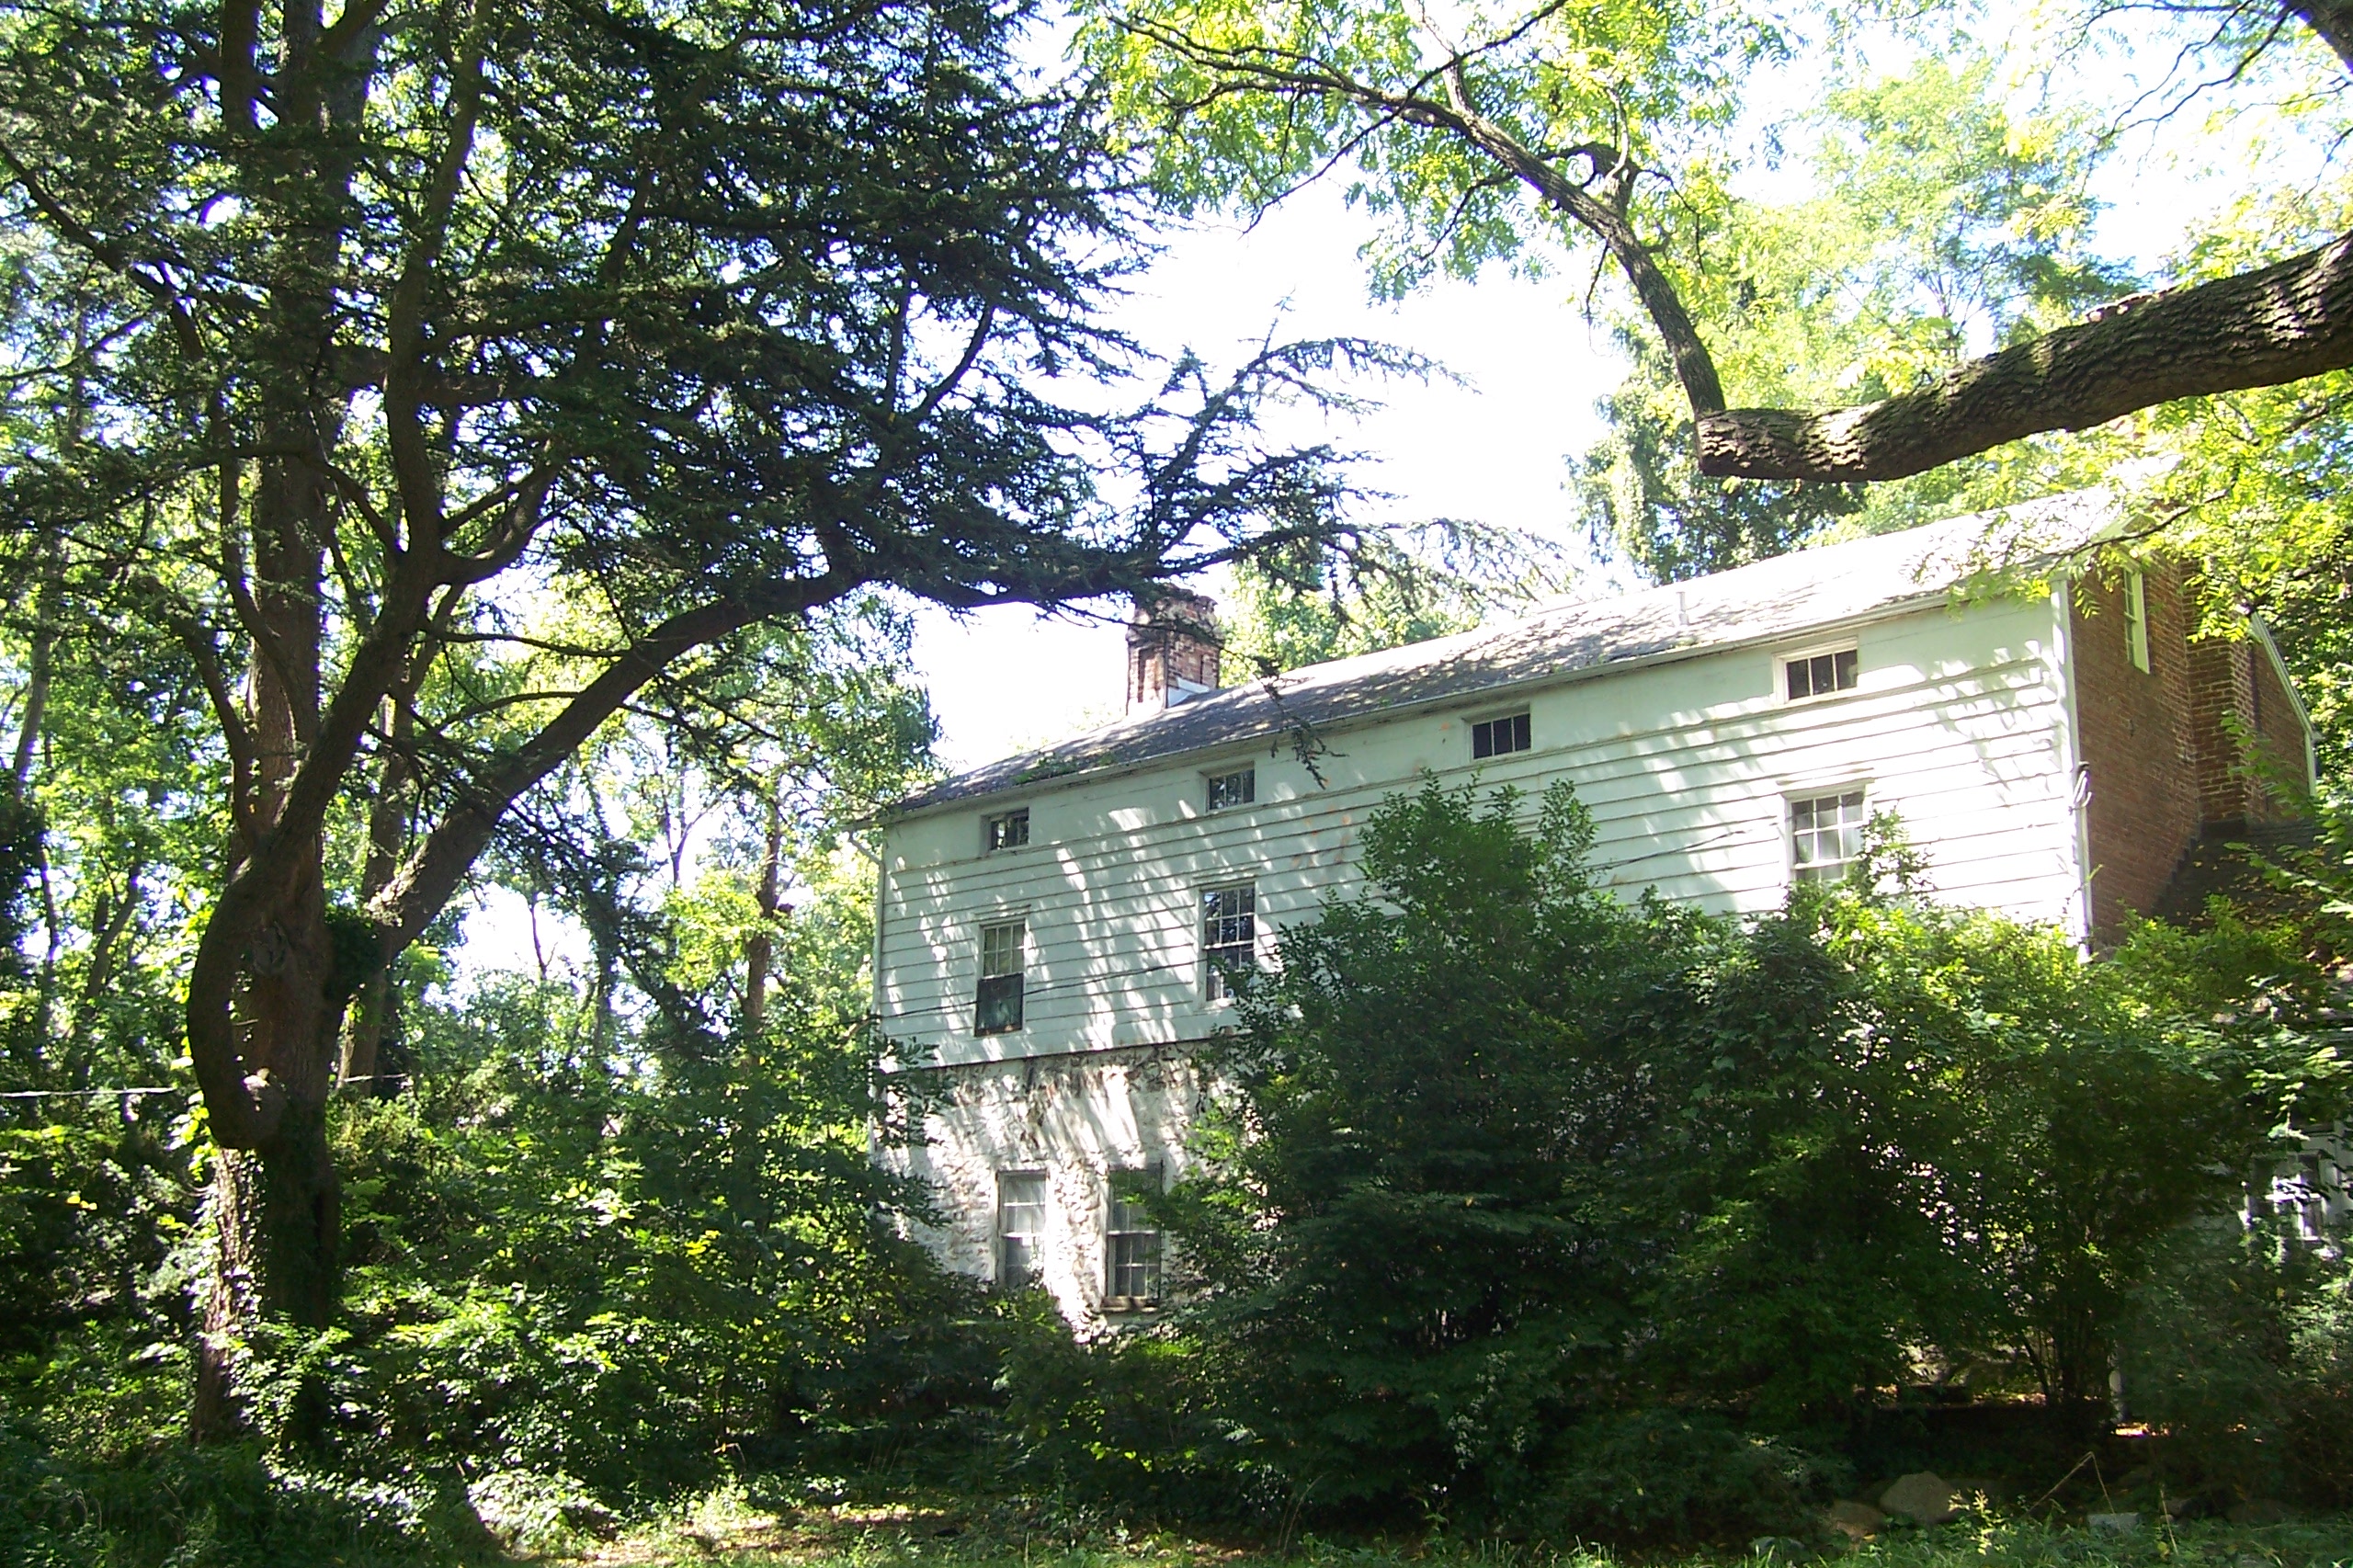 Olmsted-Beil House